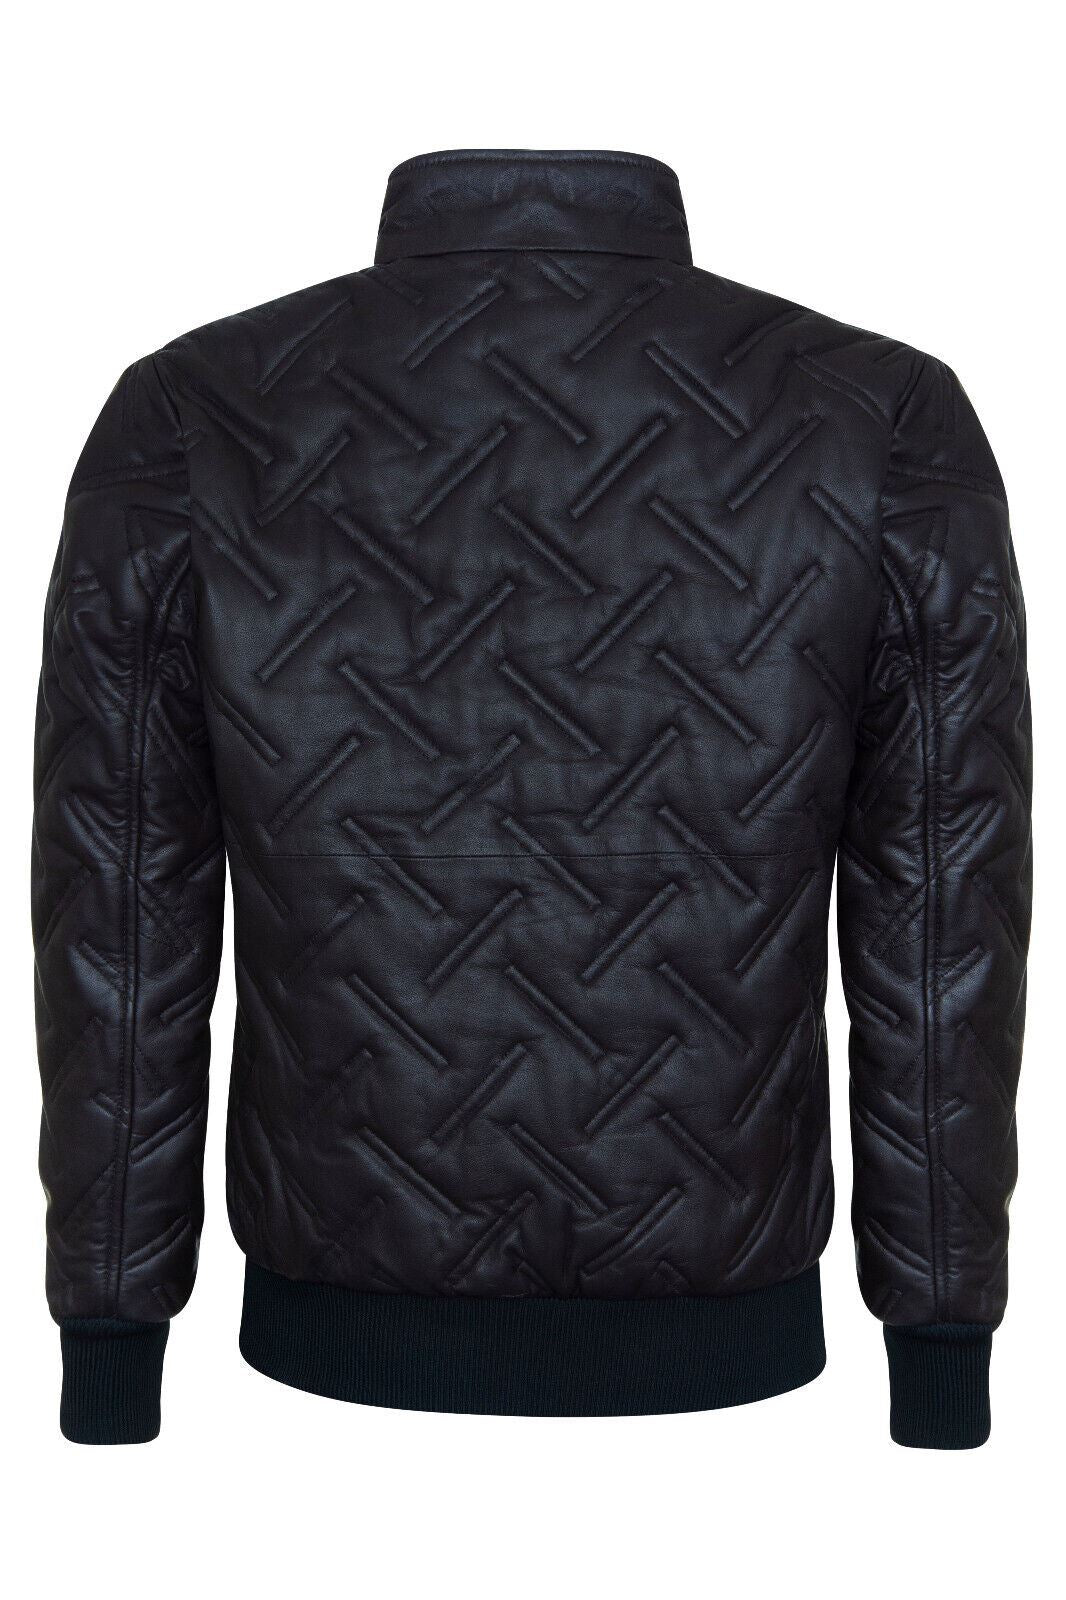 Men's Bomber Leather Quilted Jacket - Goiânia